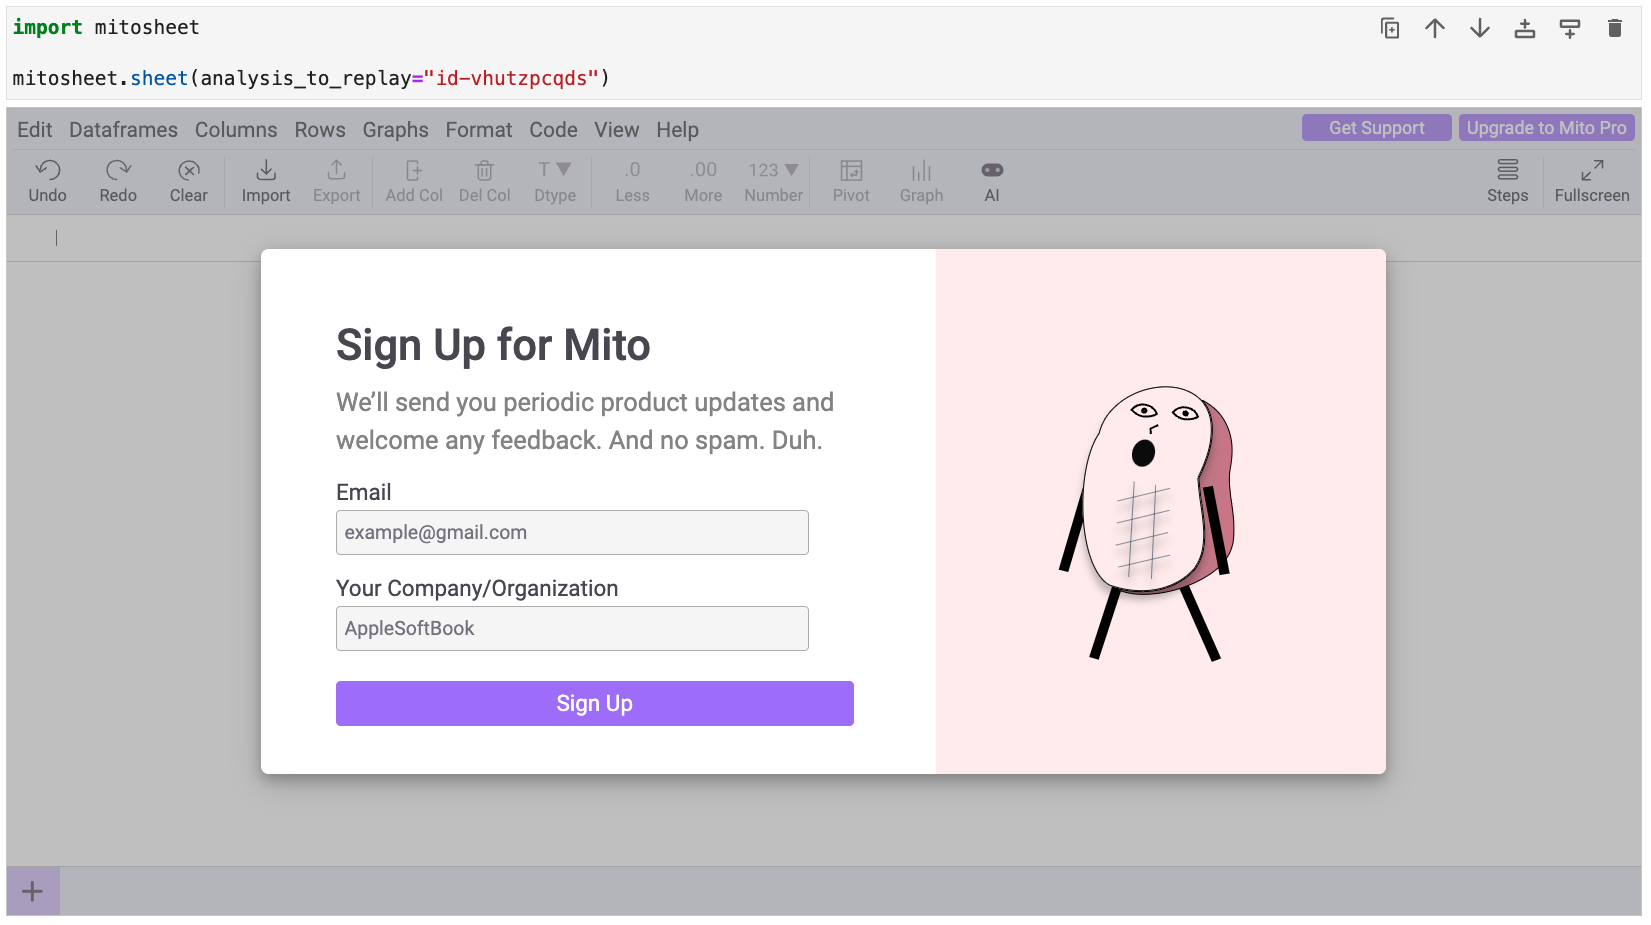 Image 6 - Signing up with Mito (image by author)